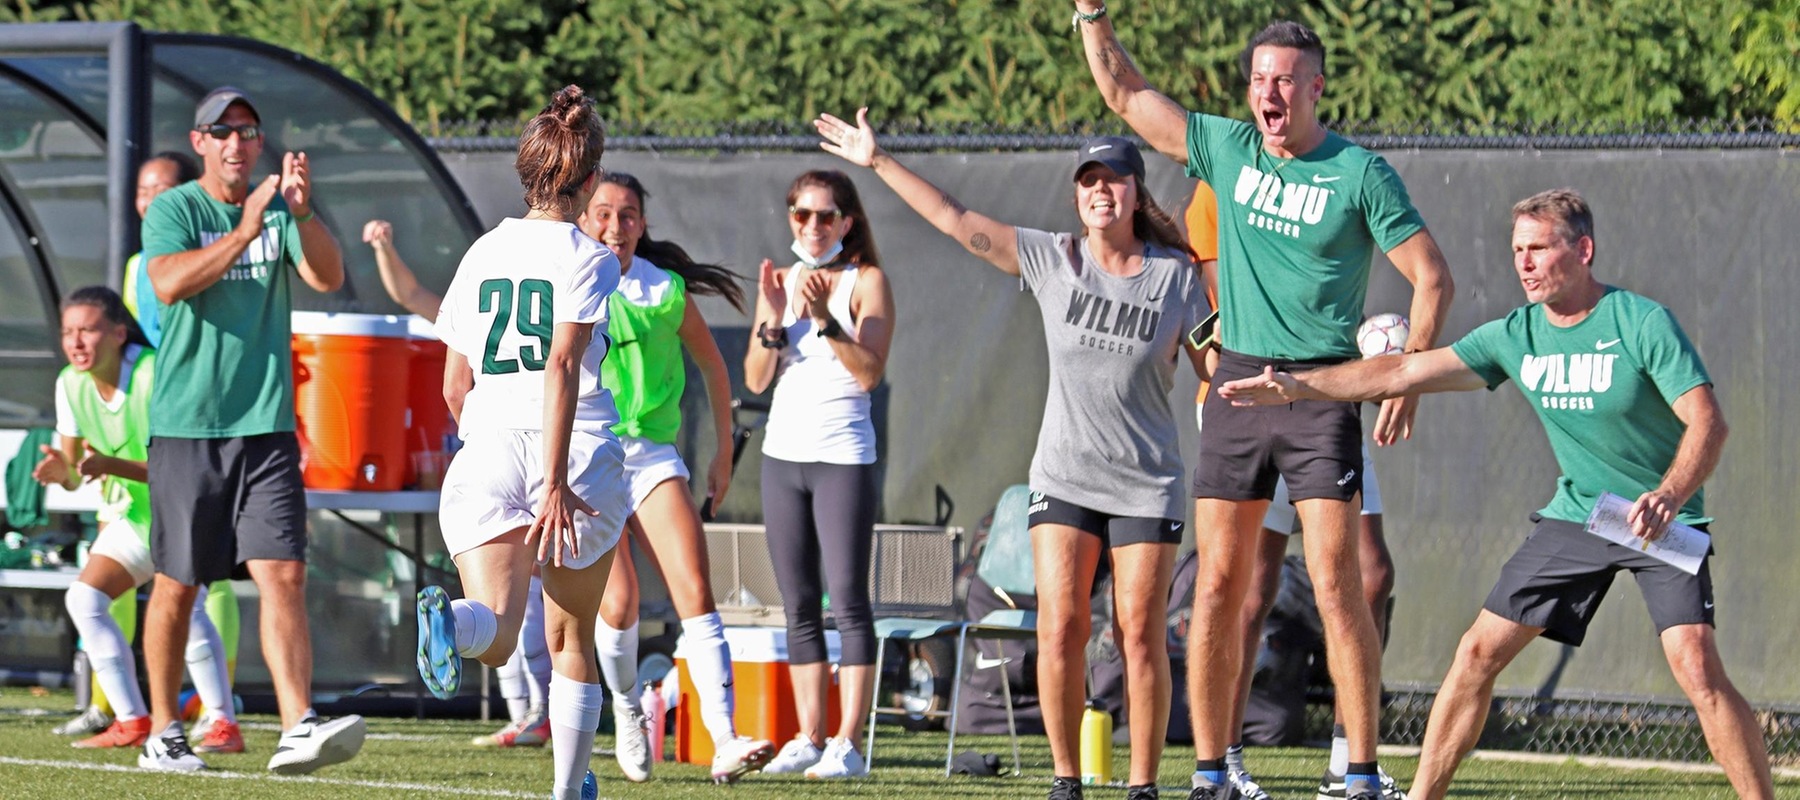 The bench reacts after Jimena Garcia Risoto (29) scored to give the Wildcats a 2-0 lead against Holy Family. Copyright 2021; Wilmington University. All rights reserved. Photo by Trudy Spence. October 20, 2021 vs. Holy Family.